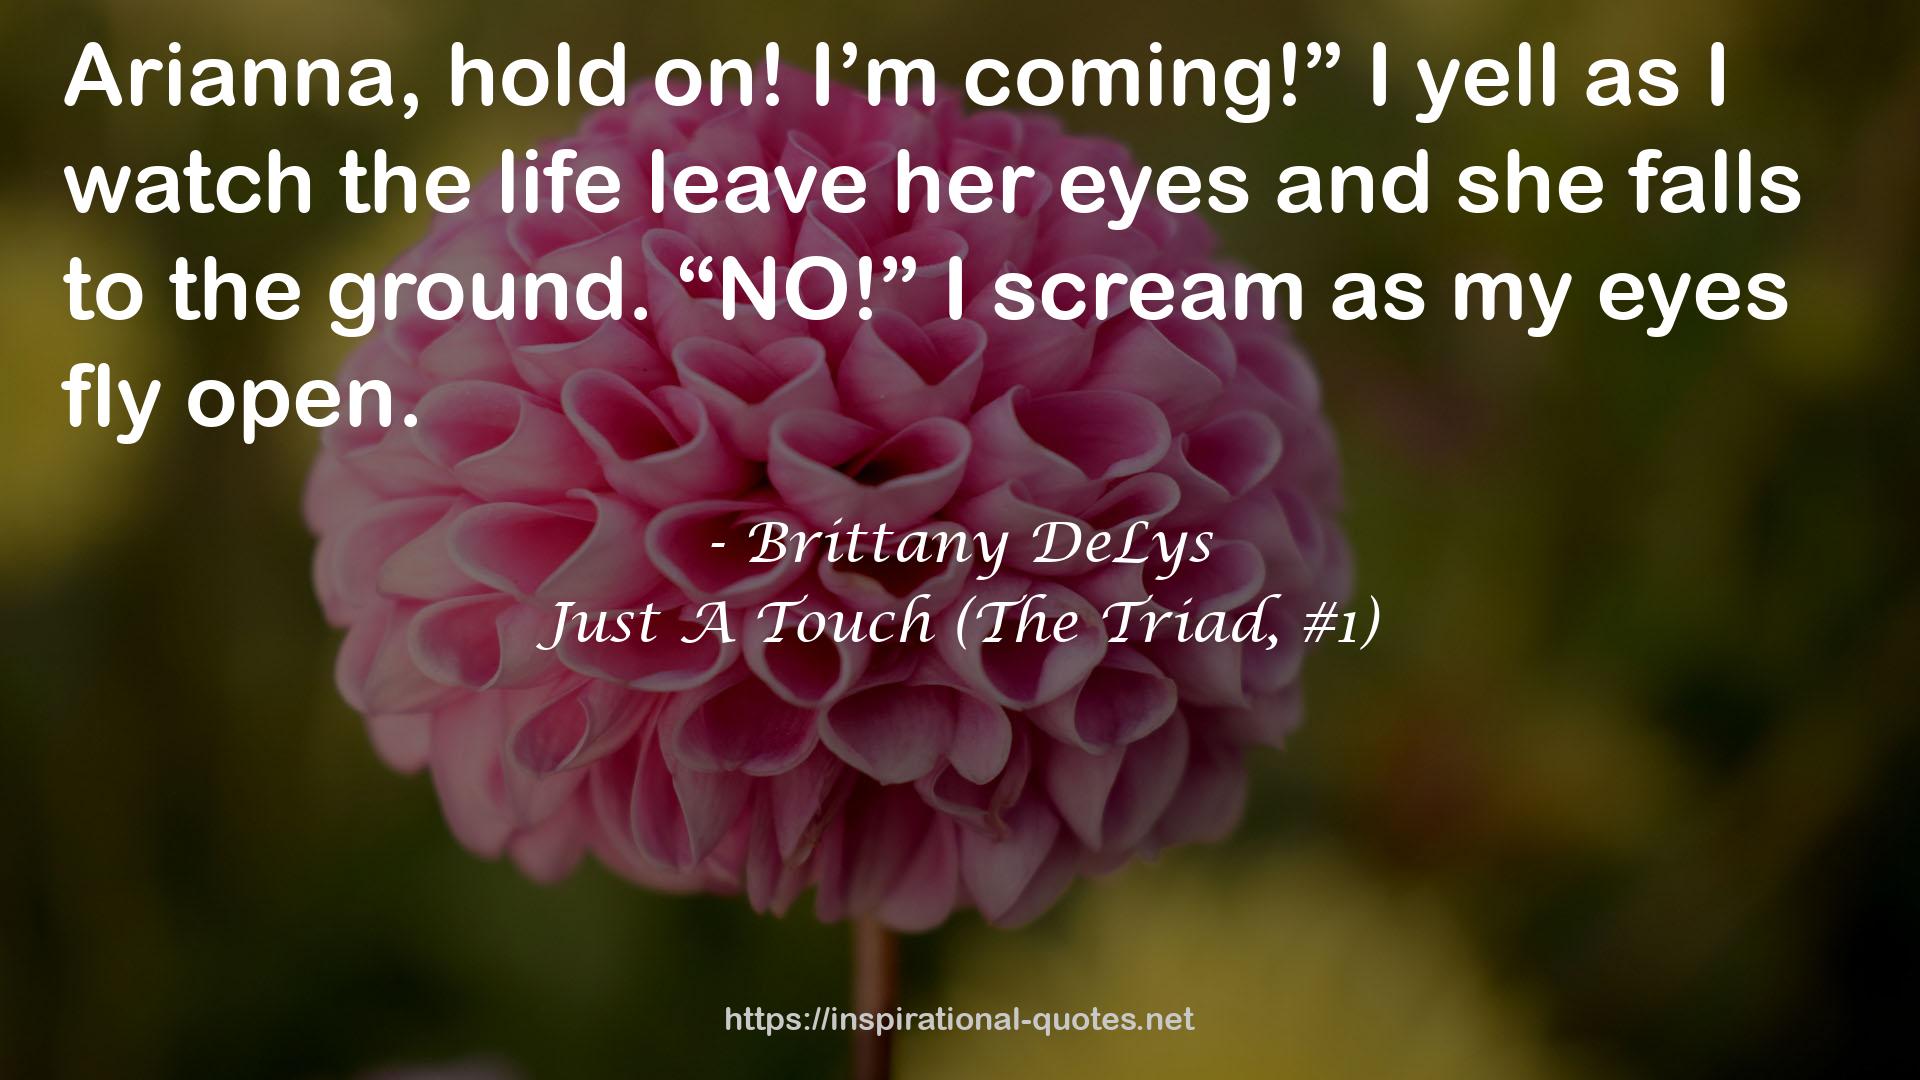 Just A Touch (The Triad, #1) QUOTES